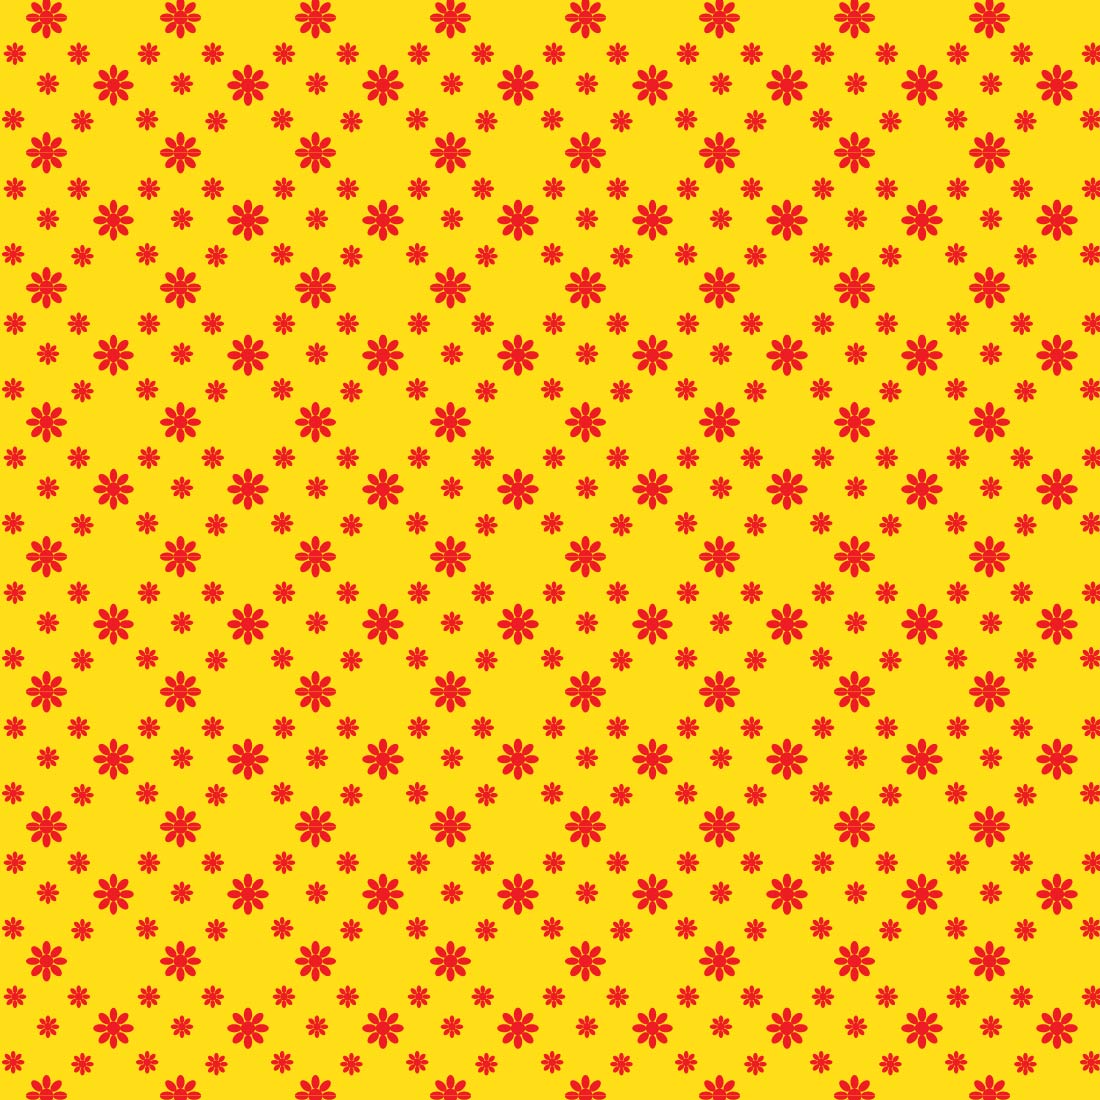 Red Flower Yellow Background Pattern cover image.